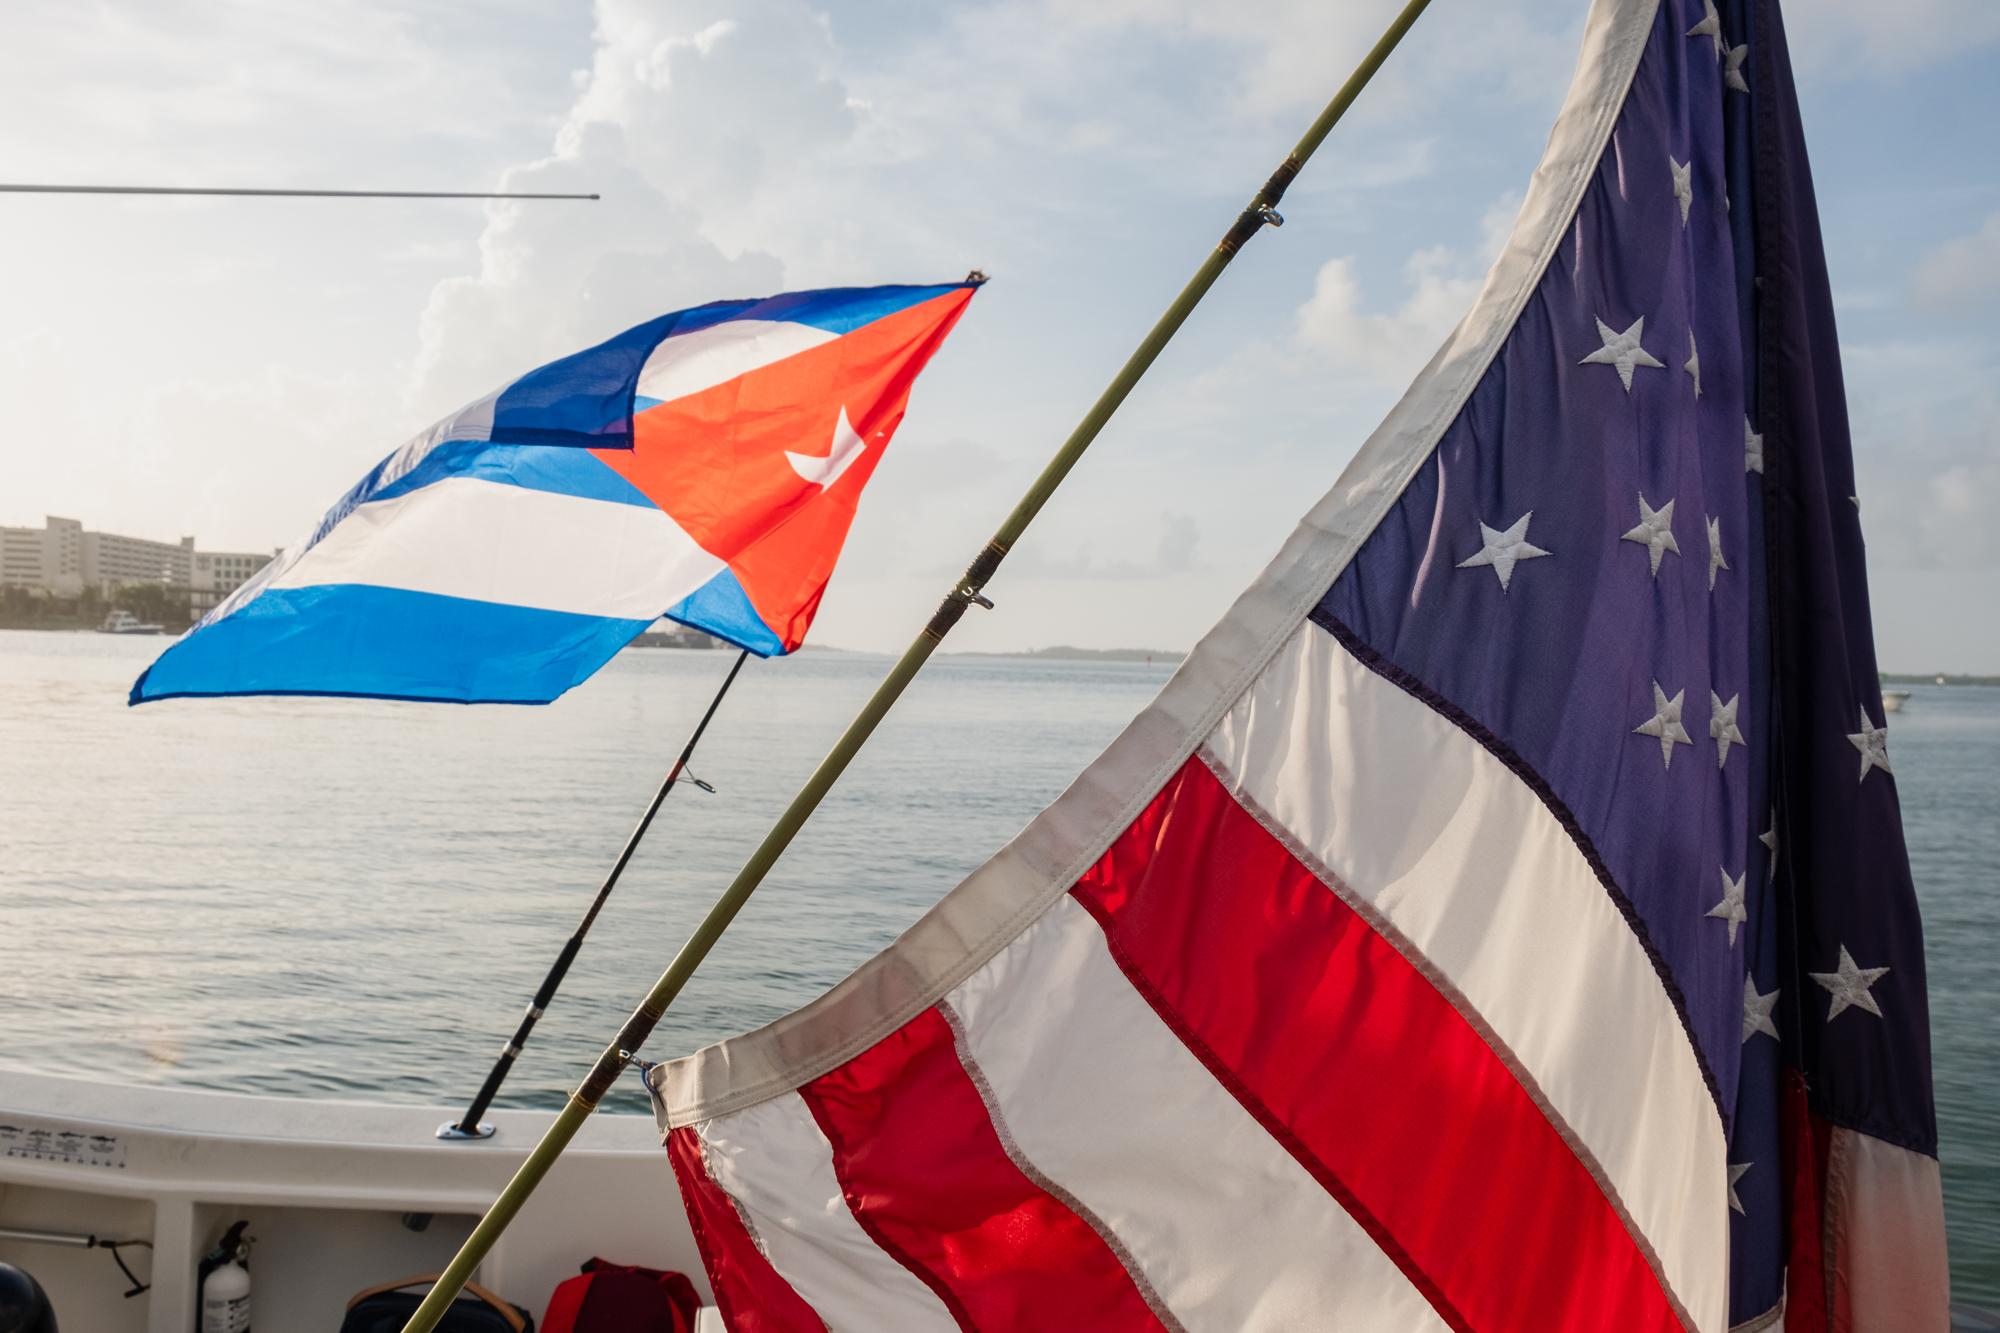  Cuban and US flags on boats that were part of a flotilla headed to Cuba in solidarity with the ongoing protests. Miami, Fl. July 23, 2021. Credit:...